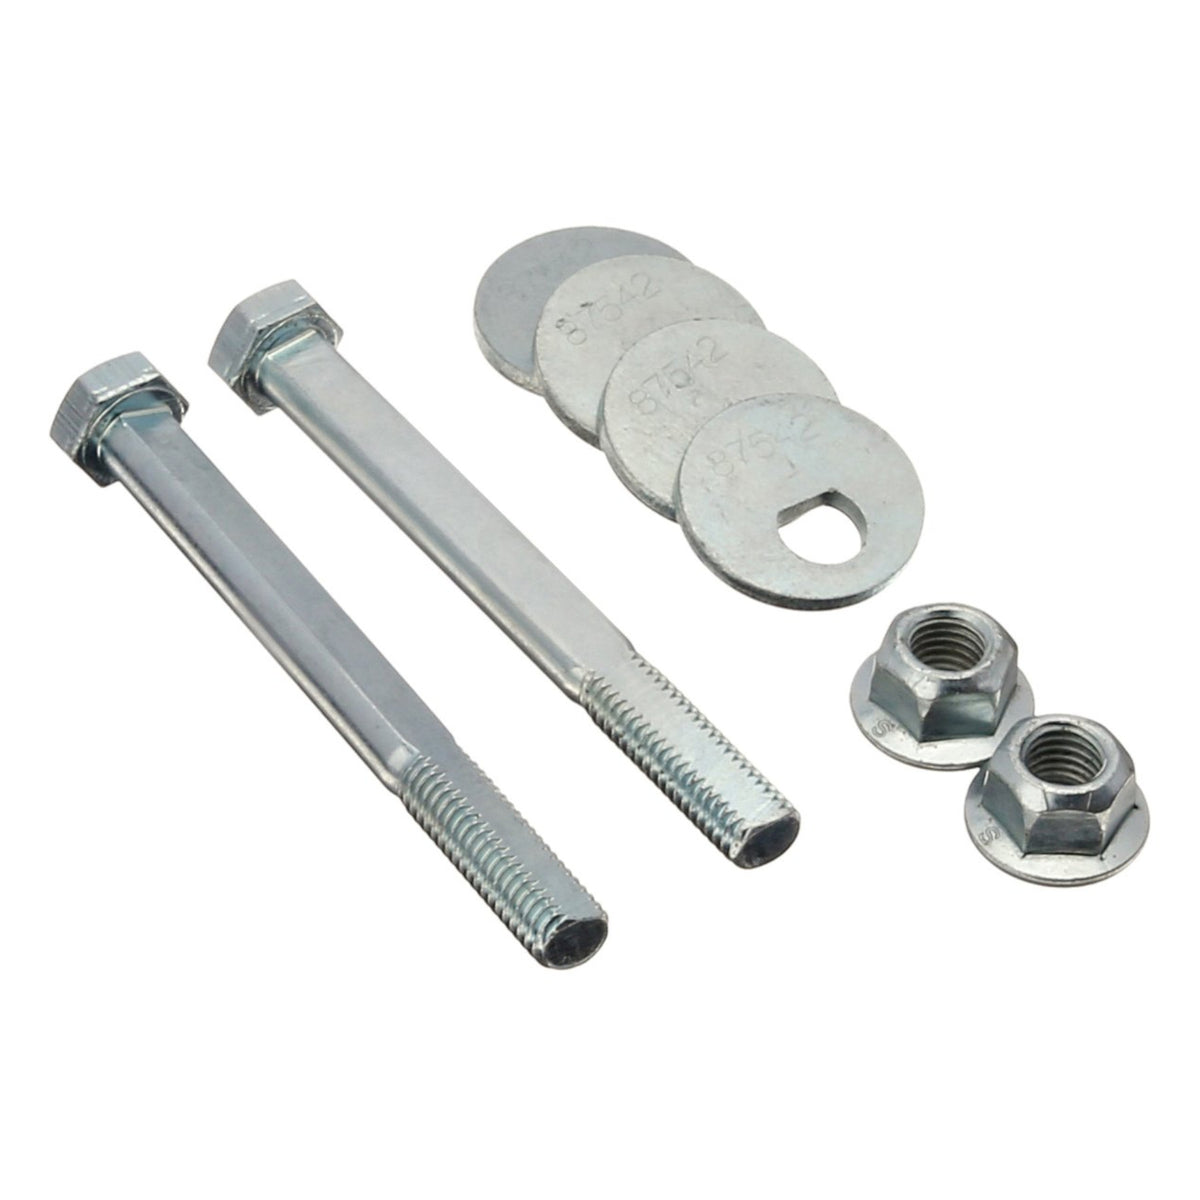 Specialty Nissan Caster &amp; Camber Bolt Kit (87520) (2 Pieces per Kit)